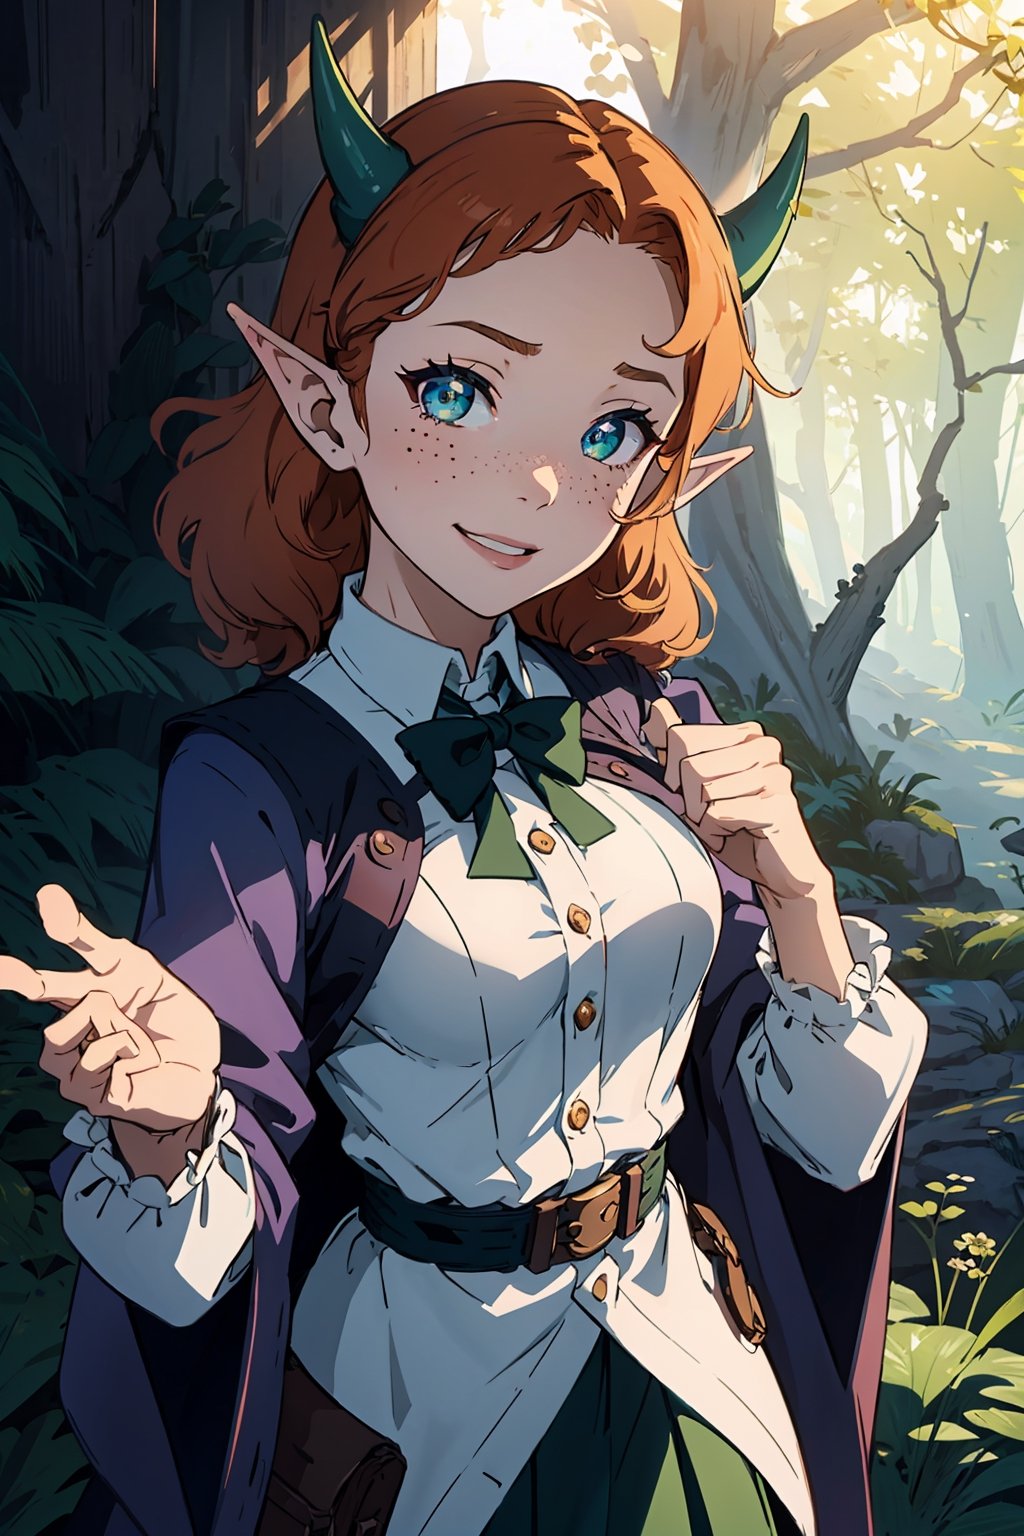 Imagine a female child with short fluffy and messy curly bright orange hair. She has small breasts and is a lolita. Her eyes are a bright shade of green, sparkling with intricate detail and a hit on magic. She has pointed elf ears. She has two short horns on her head. She has an evil smile on her face that shows she's up to no good. She has warm freckles on her face. She wears a white button up long sleeve top and a long purple skirt and long green trench coat with lots of pockets. She is practicing magic that sparkles around her. The background is a charming forest path in the enchanted woods with bright lighting, creating a magical ambiance. This artwork captures the essence of mischief and magic against the backdrop of a beautiful setting. detailed, detail_eyes, detailed_hair, detailed_scenario, detailed_hands, detailed_background, vox machina style,vox machina style